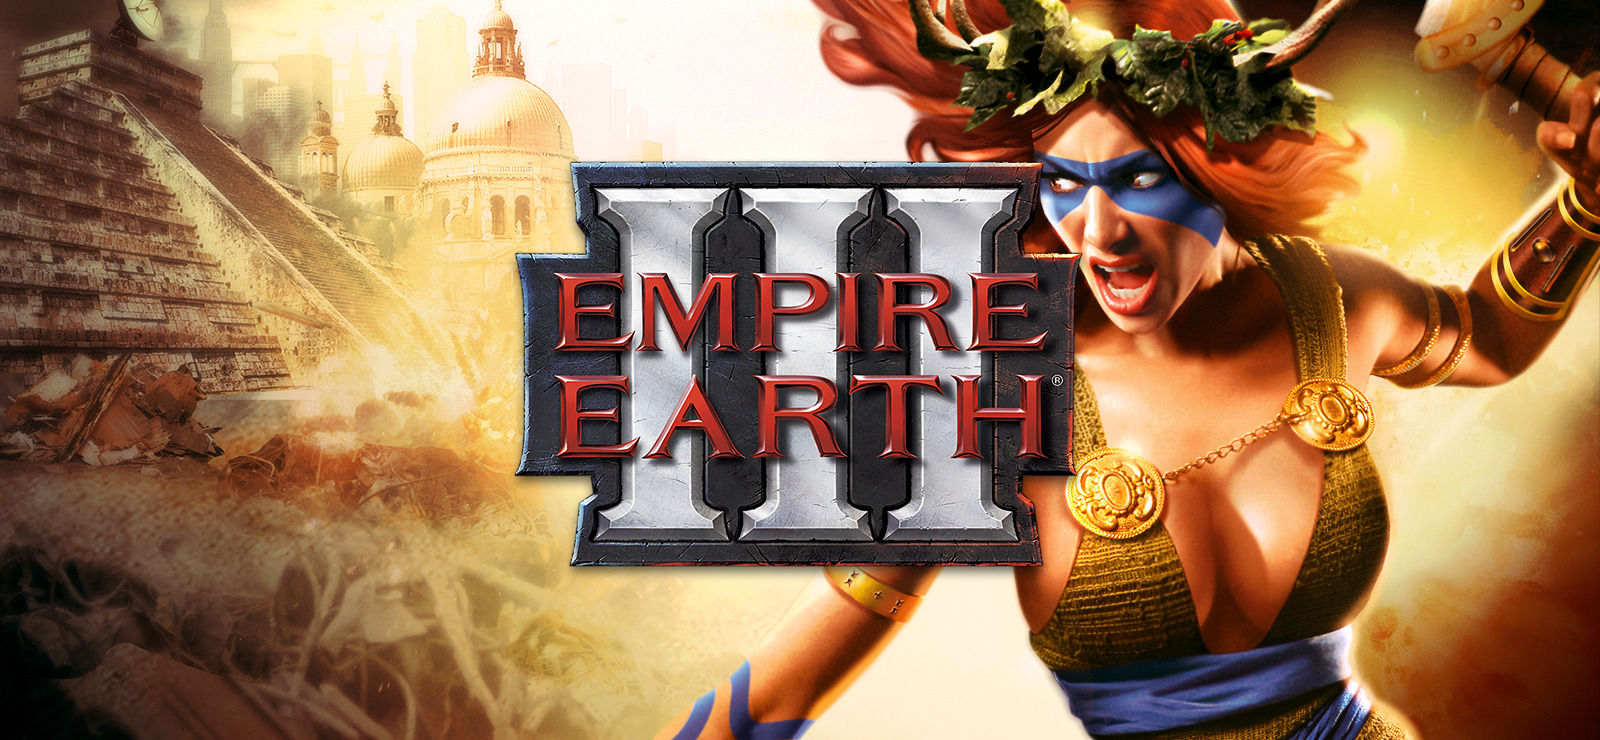 download empire earth 3 free full version for pc